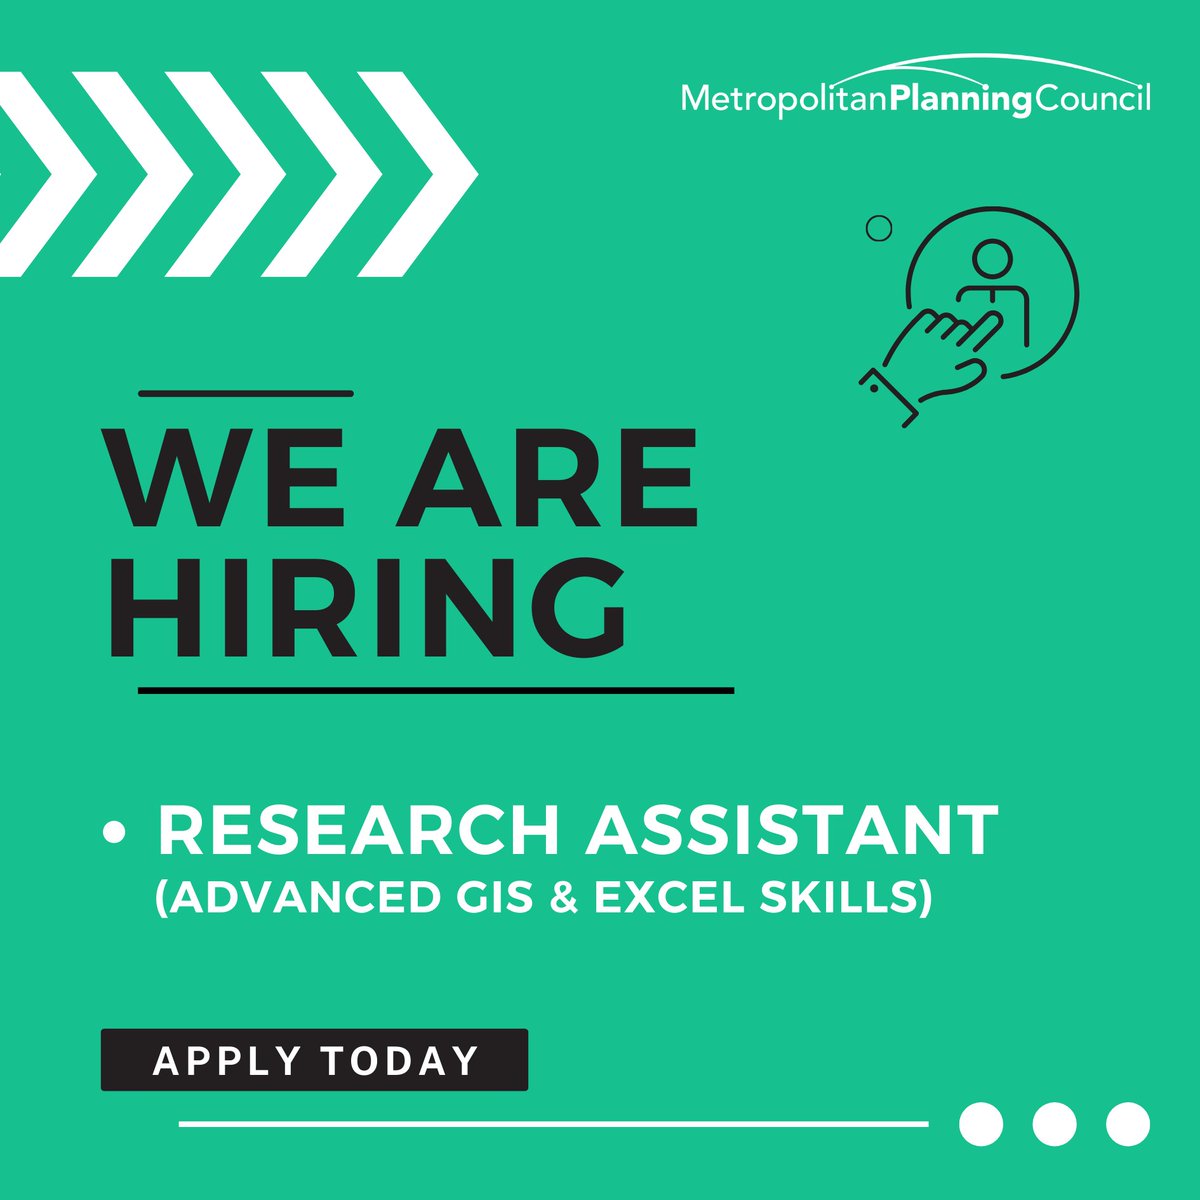 Do you have advanced GIS and Excel skills? If so, consider applying for the open 'Research Assistant' role on the MPC team! To learn more and apply, visit metroplanners.org/employment or click the link in our bio. #Hiring #ChicagoHiring #Research